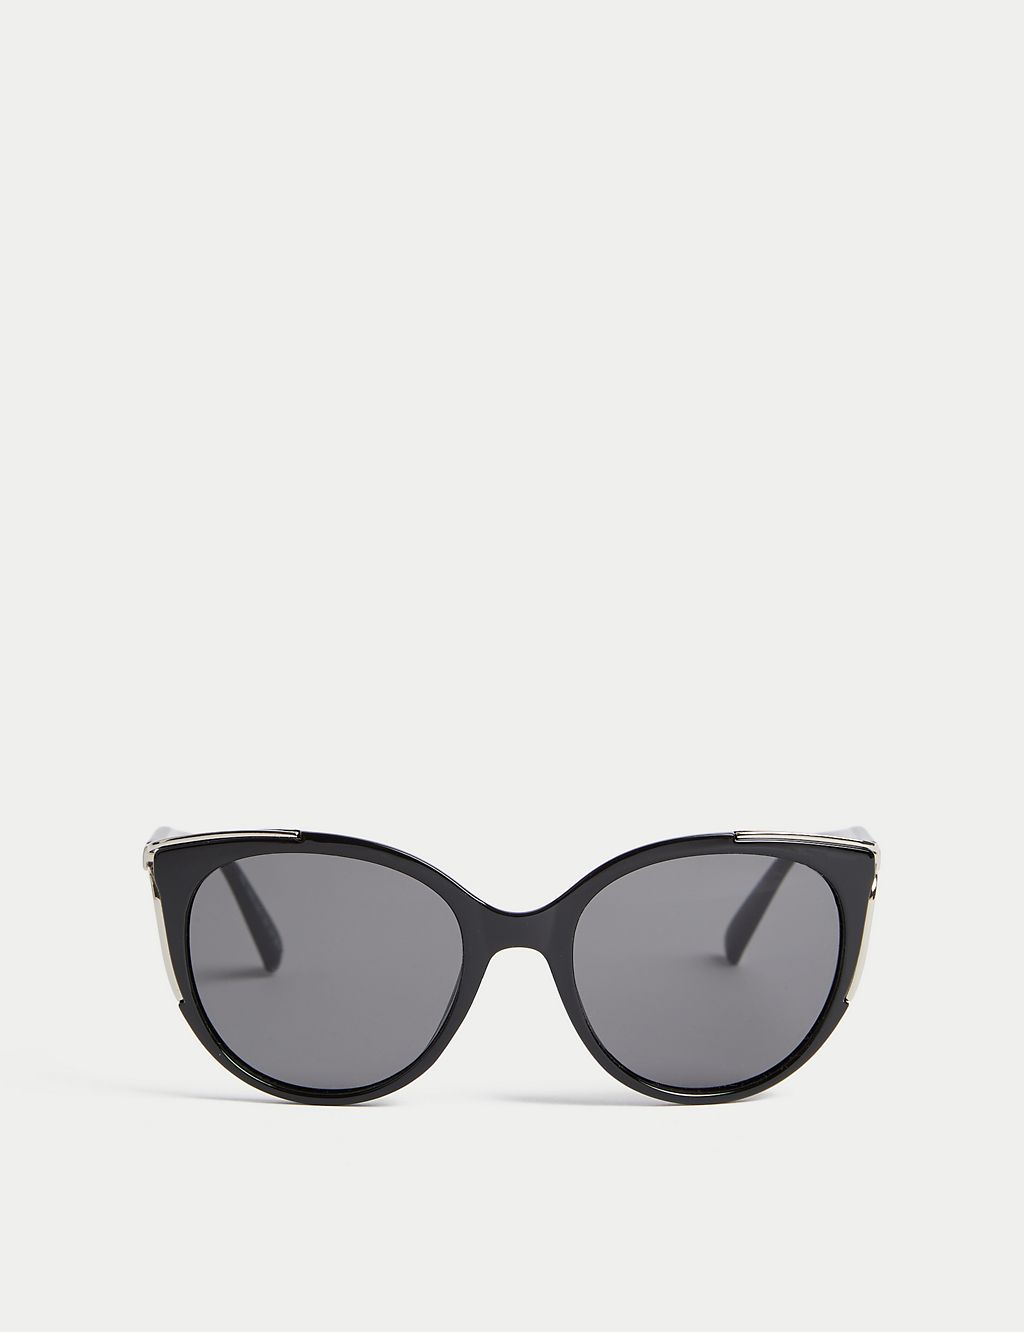 Round Cat Eye Sunglasses | M&S Collection | M&S